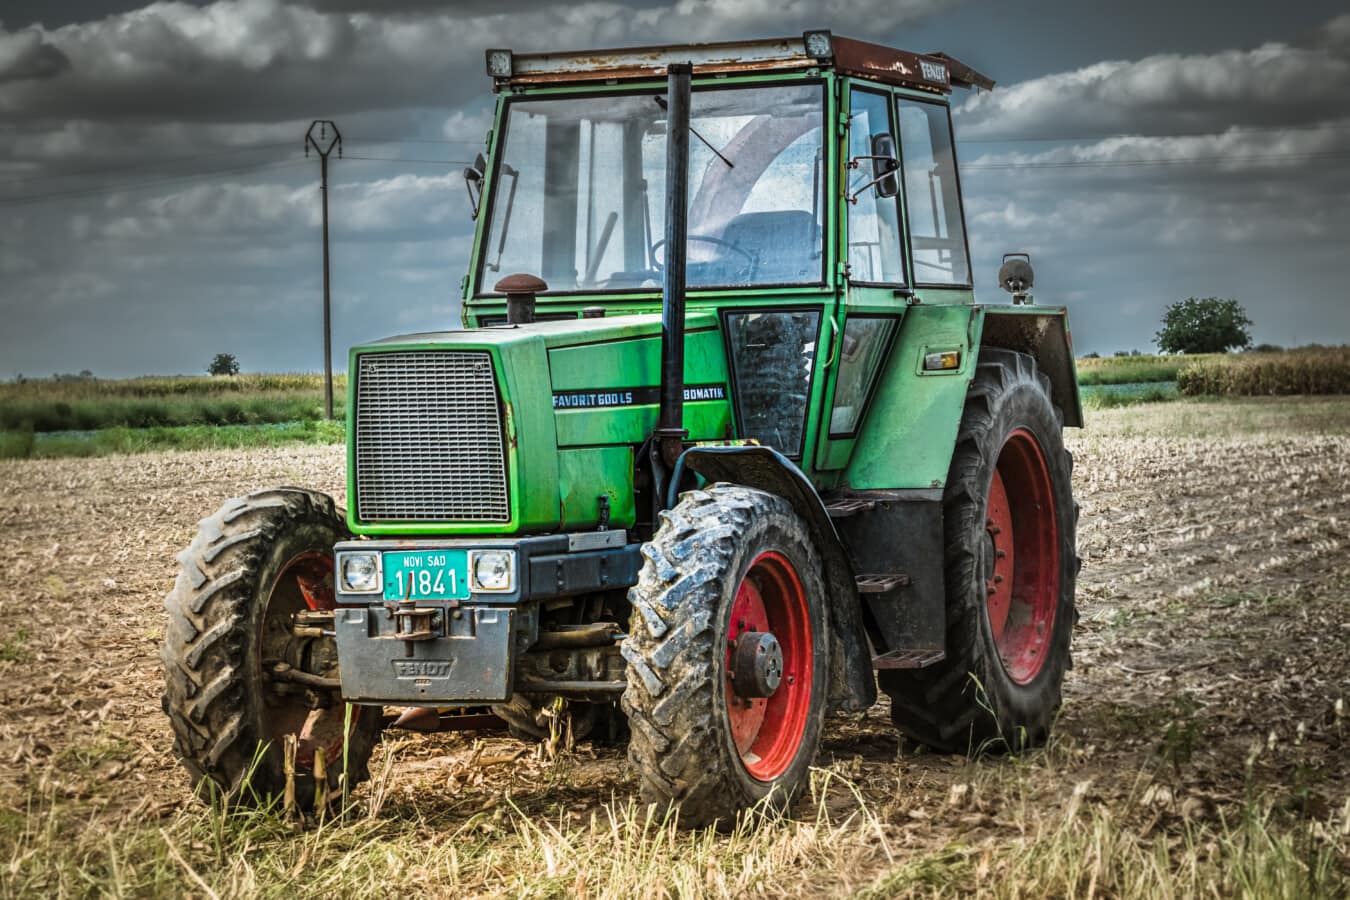 tractor, green, agriculture, field work, soil, machinery, equipment, machine, vehicle, industry